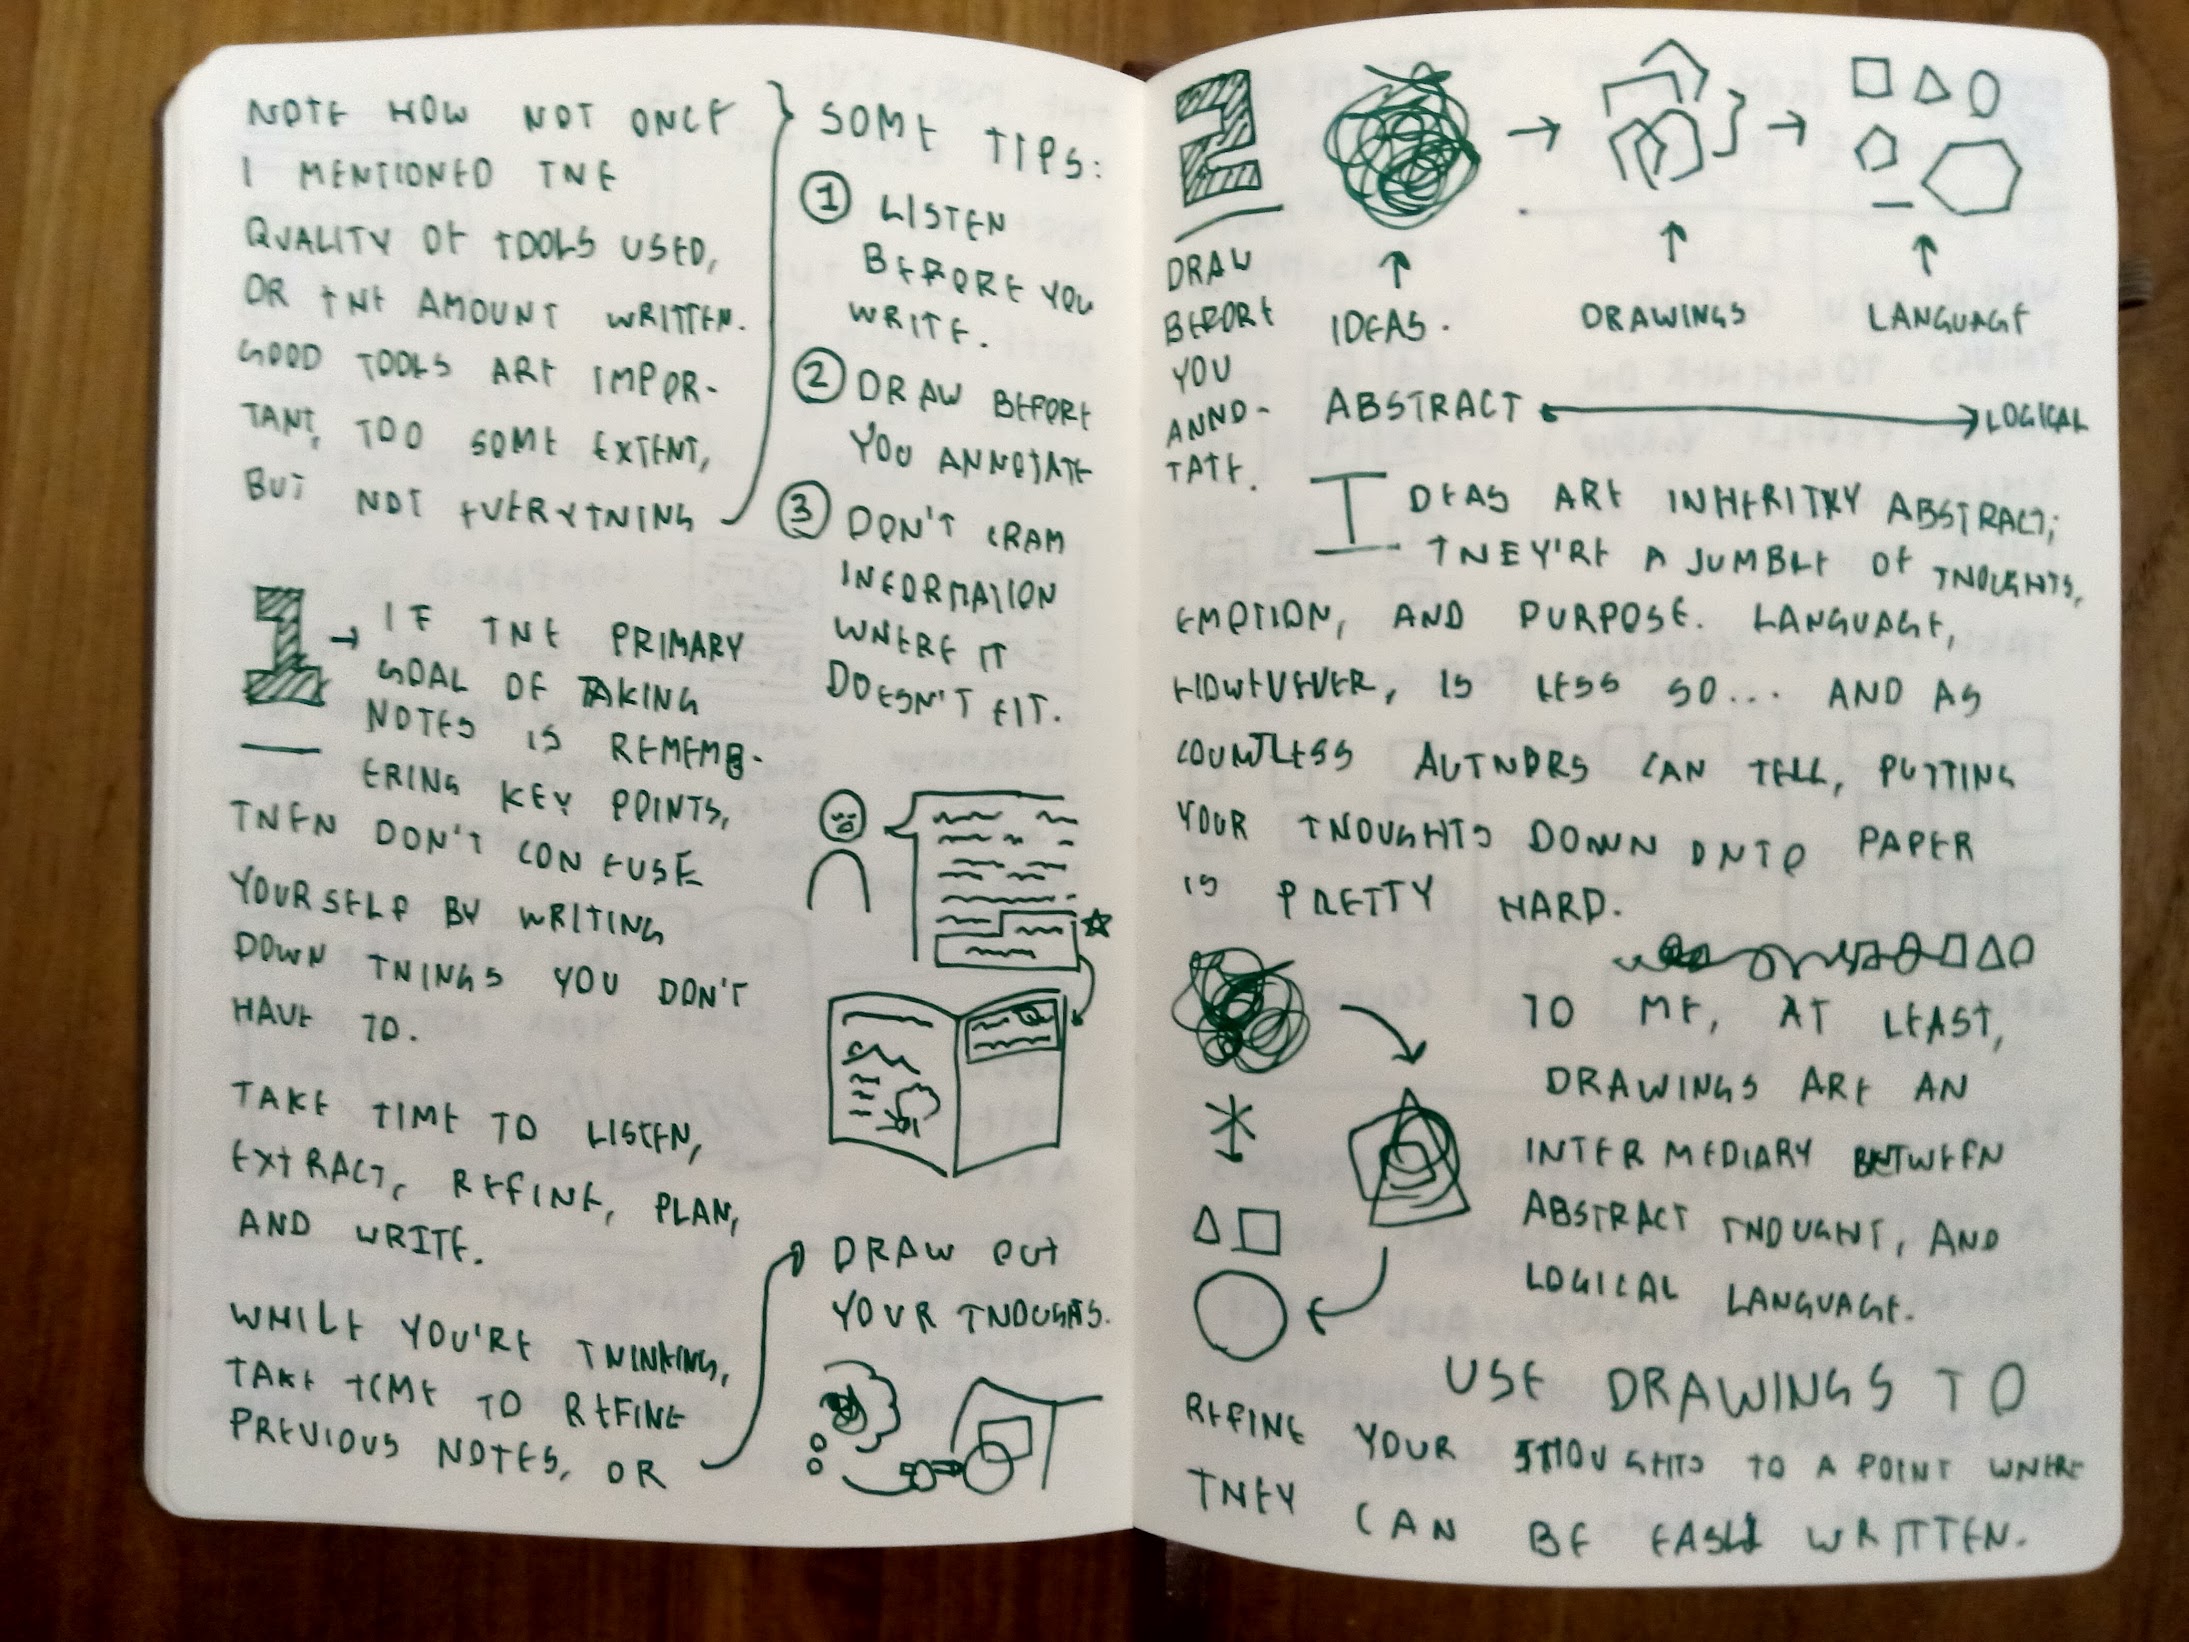 The second spread of sketchnotes.